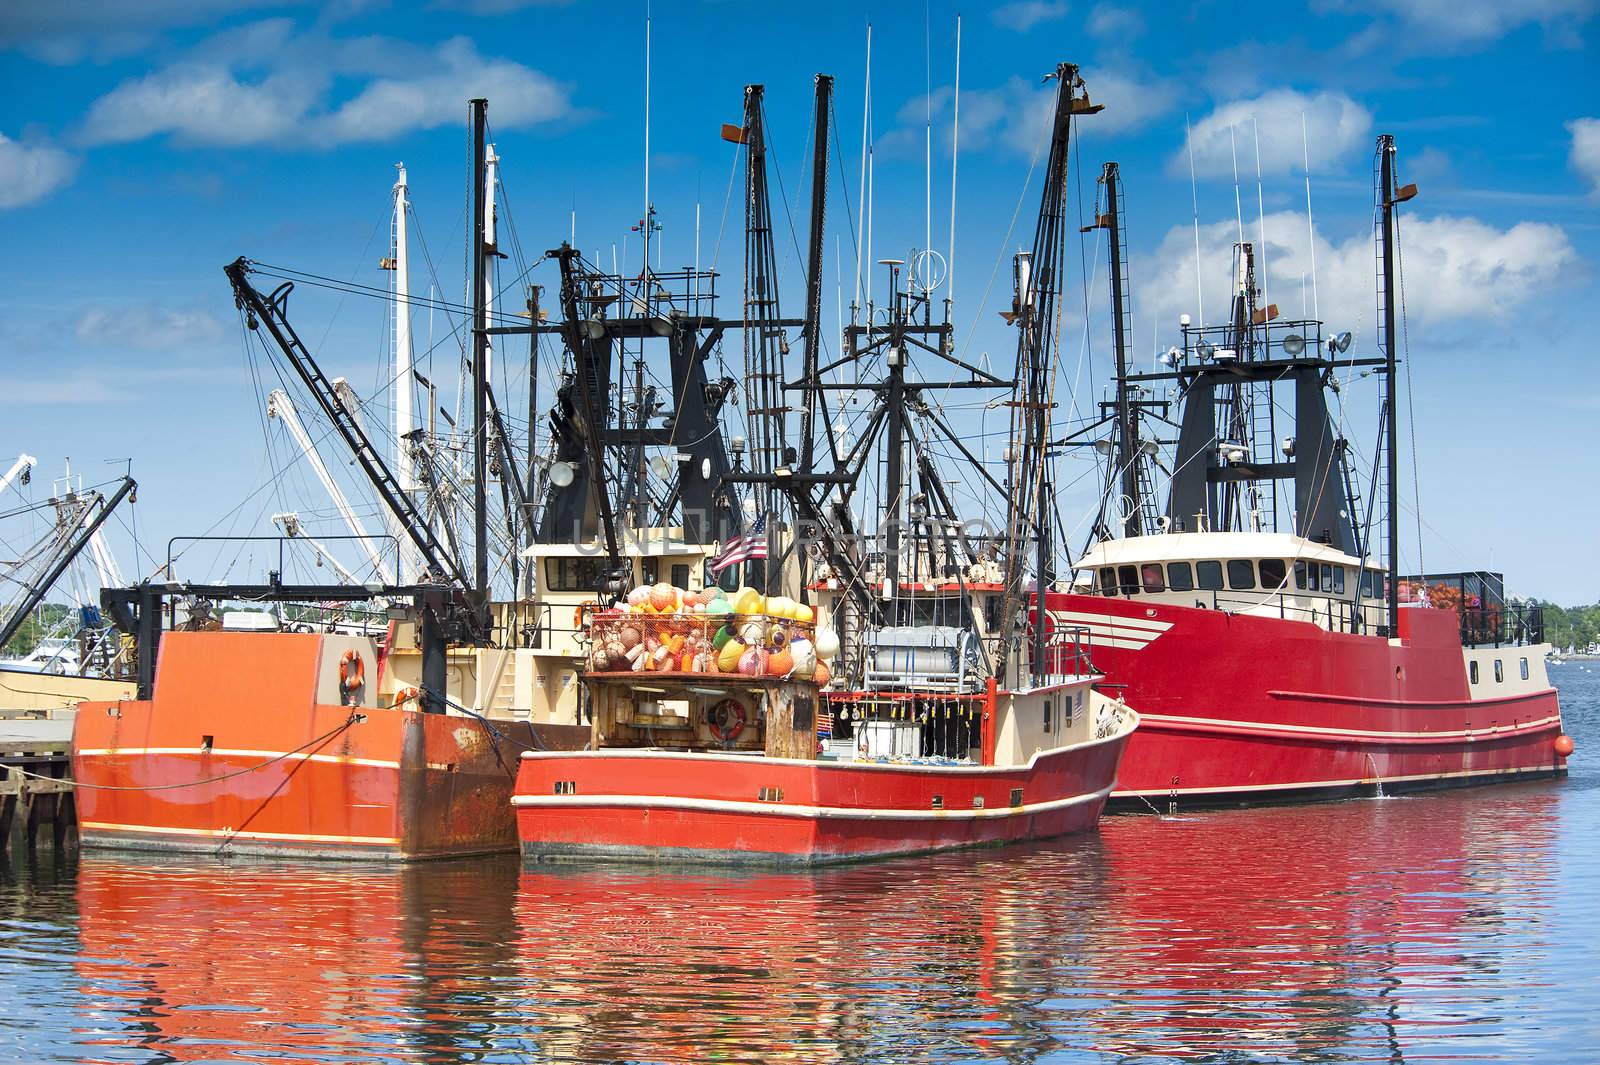 Commercial fishing boats in New Bedford harbor, Massachusetts, USA